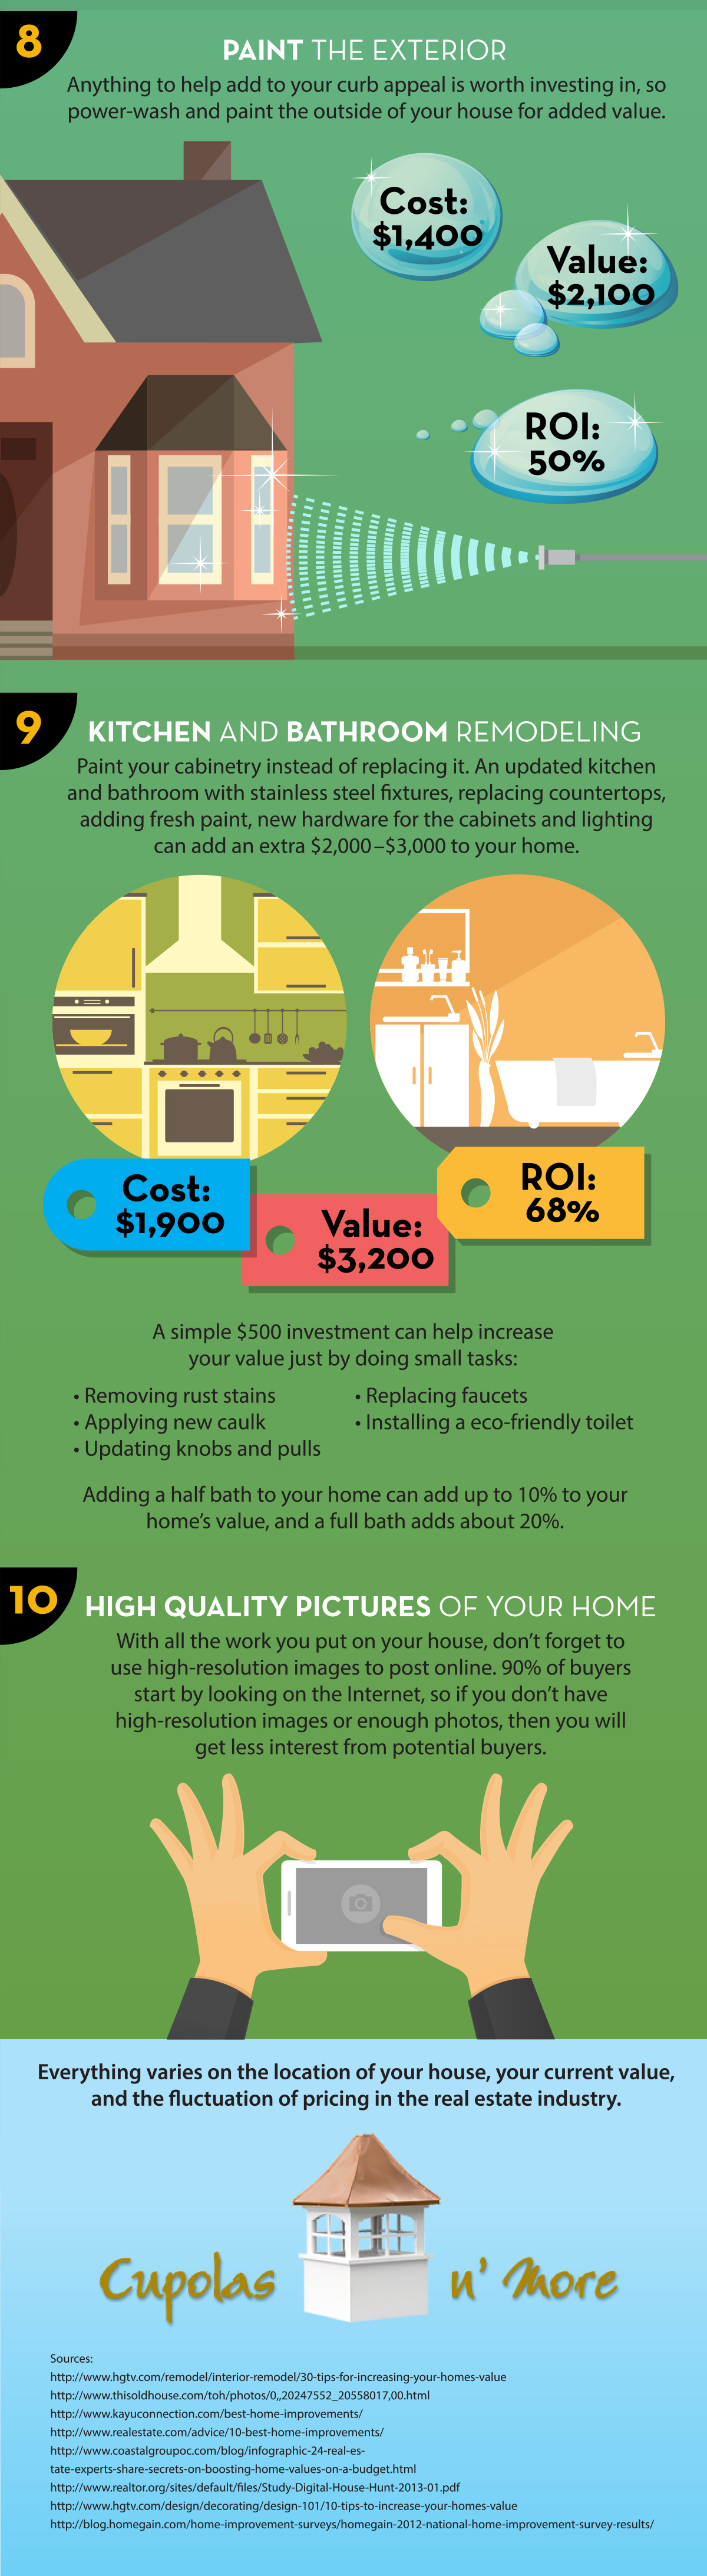 increase-the-value-of-your-home-3_4372